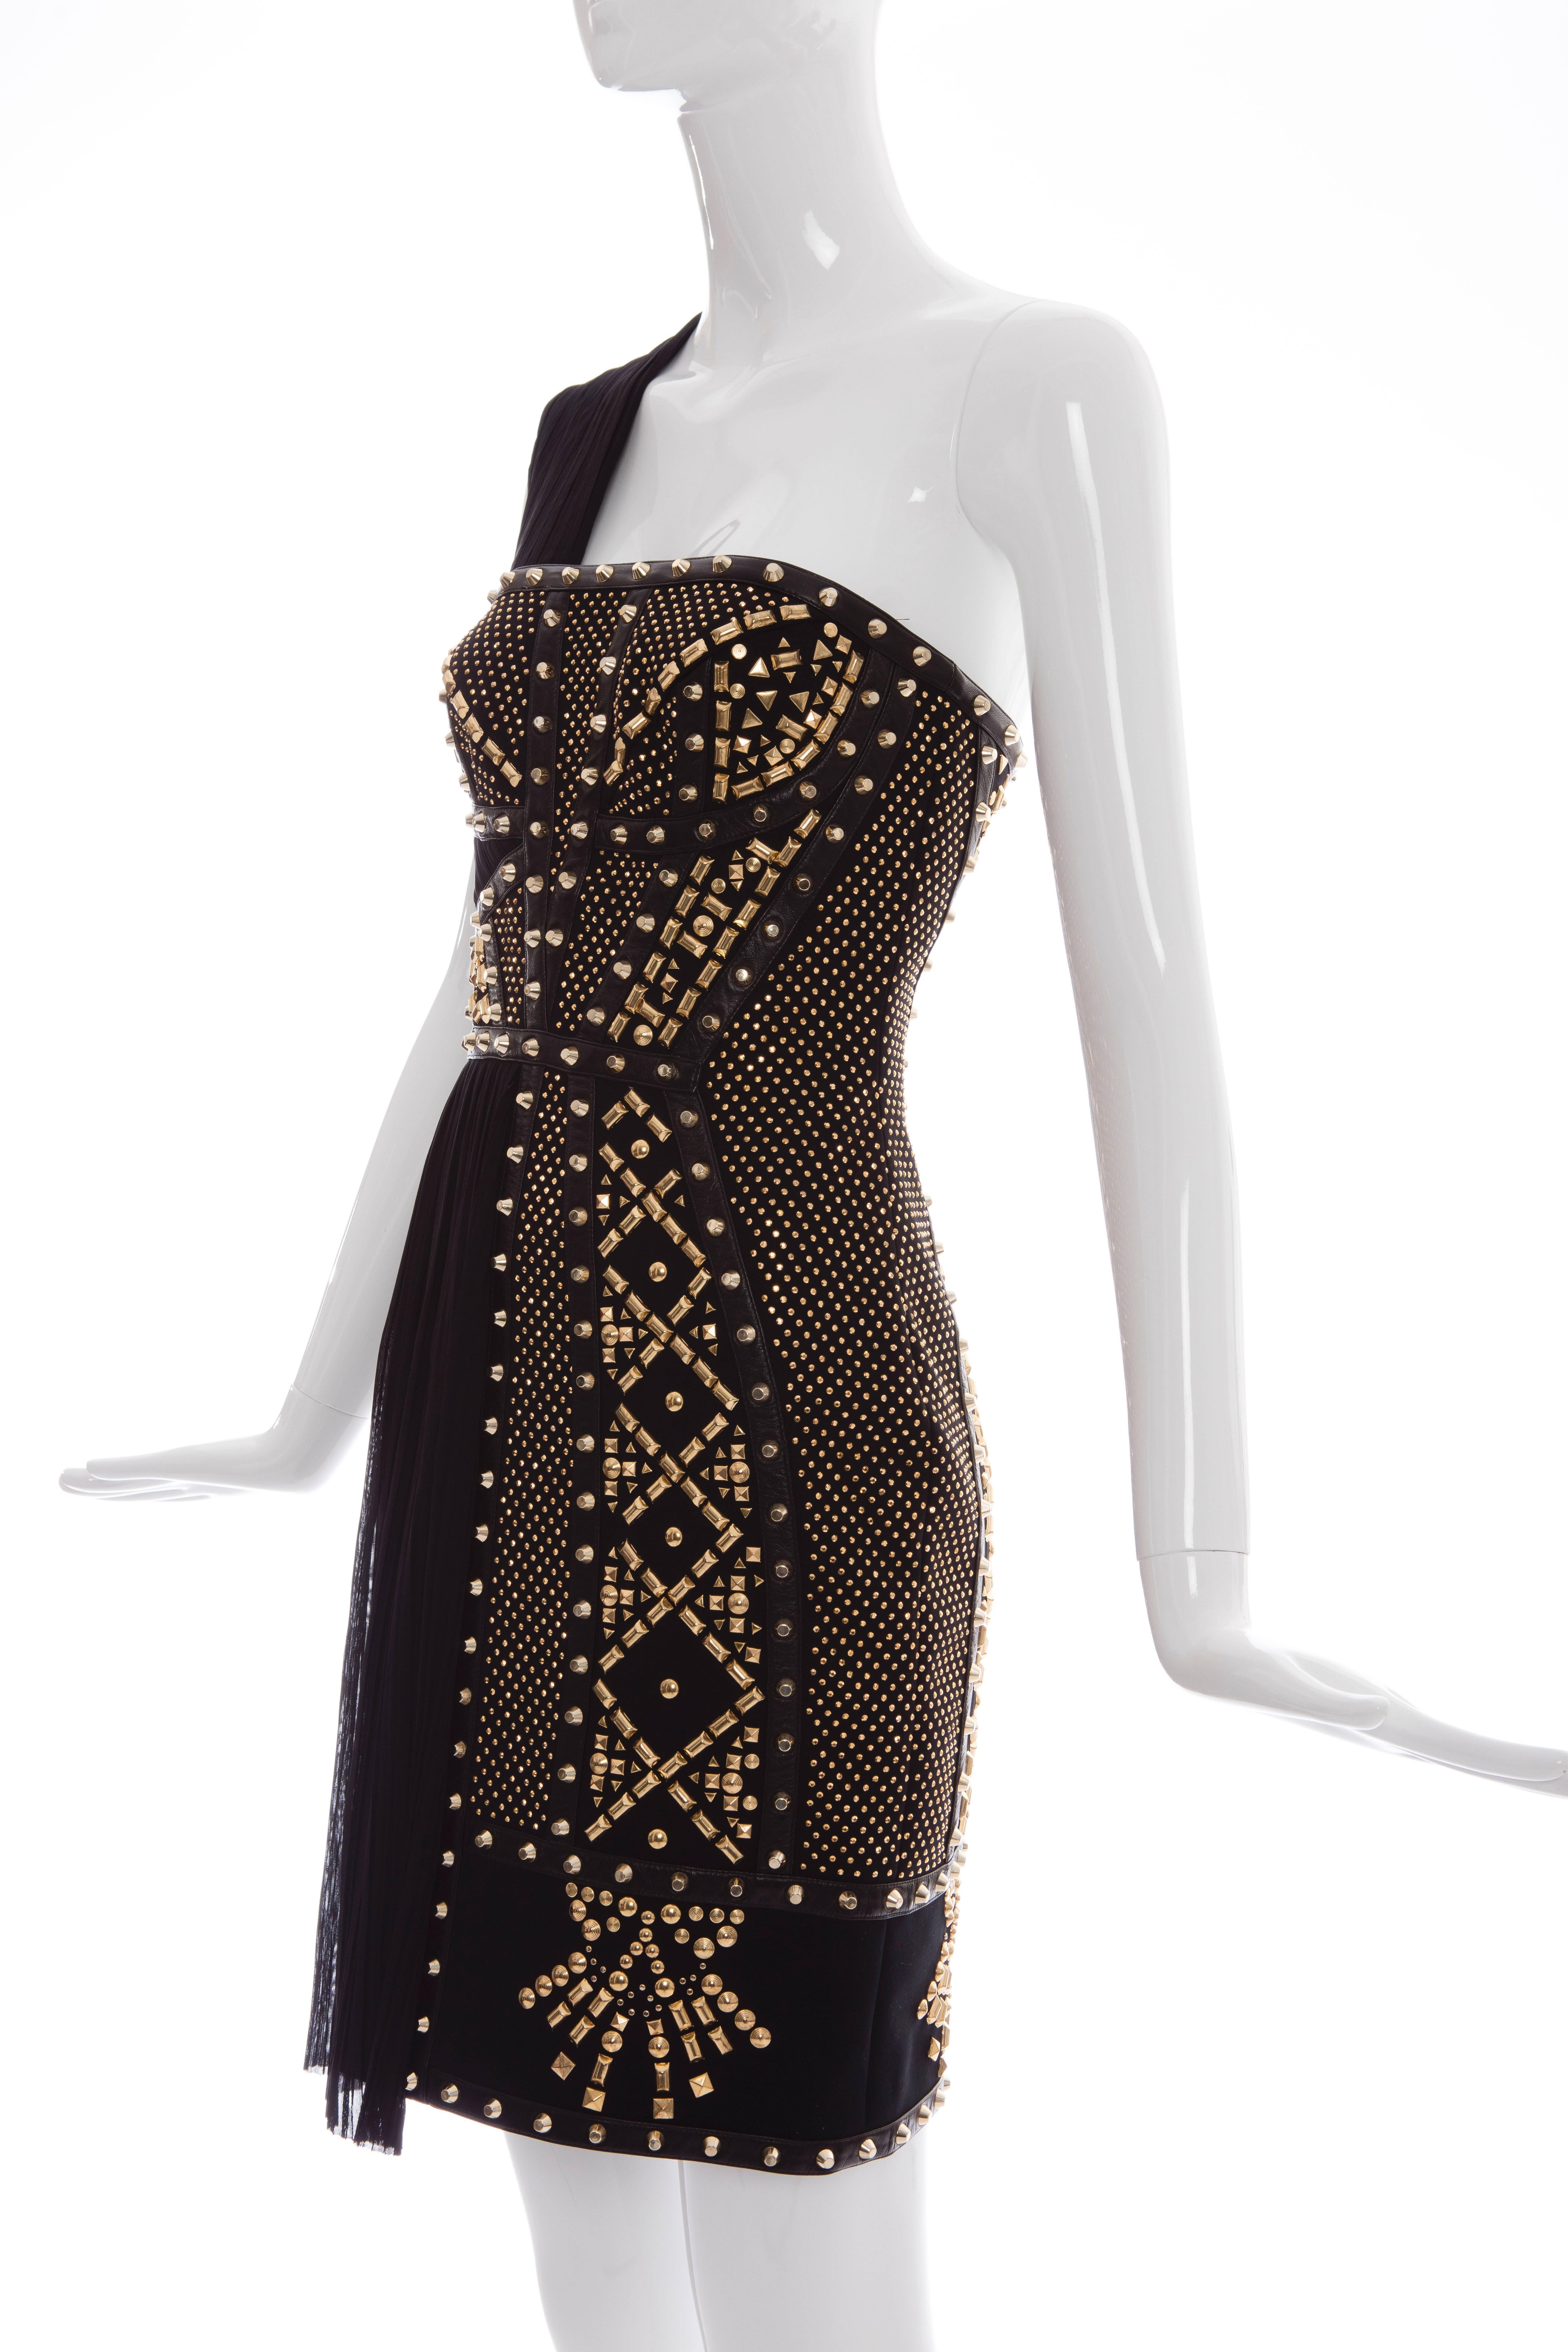 Versace Geometric Studded Dress with Leather Trim, Spring 2012 2